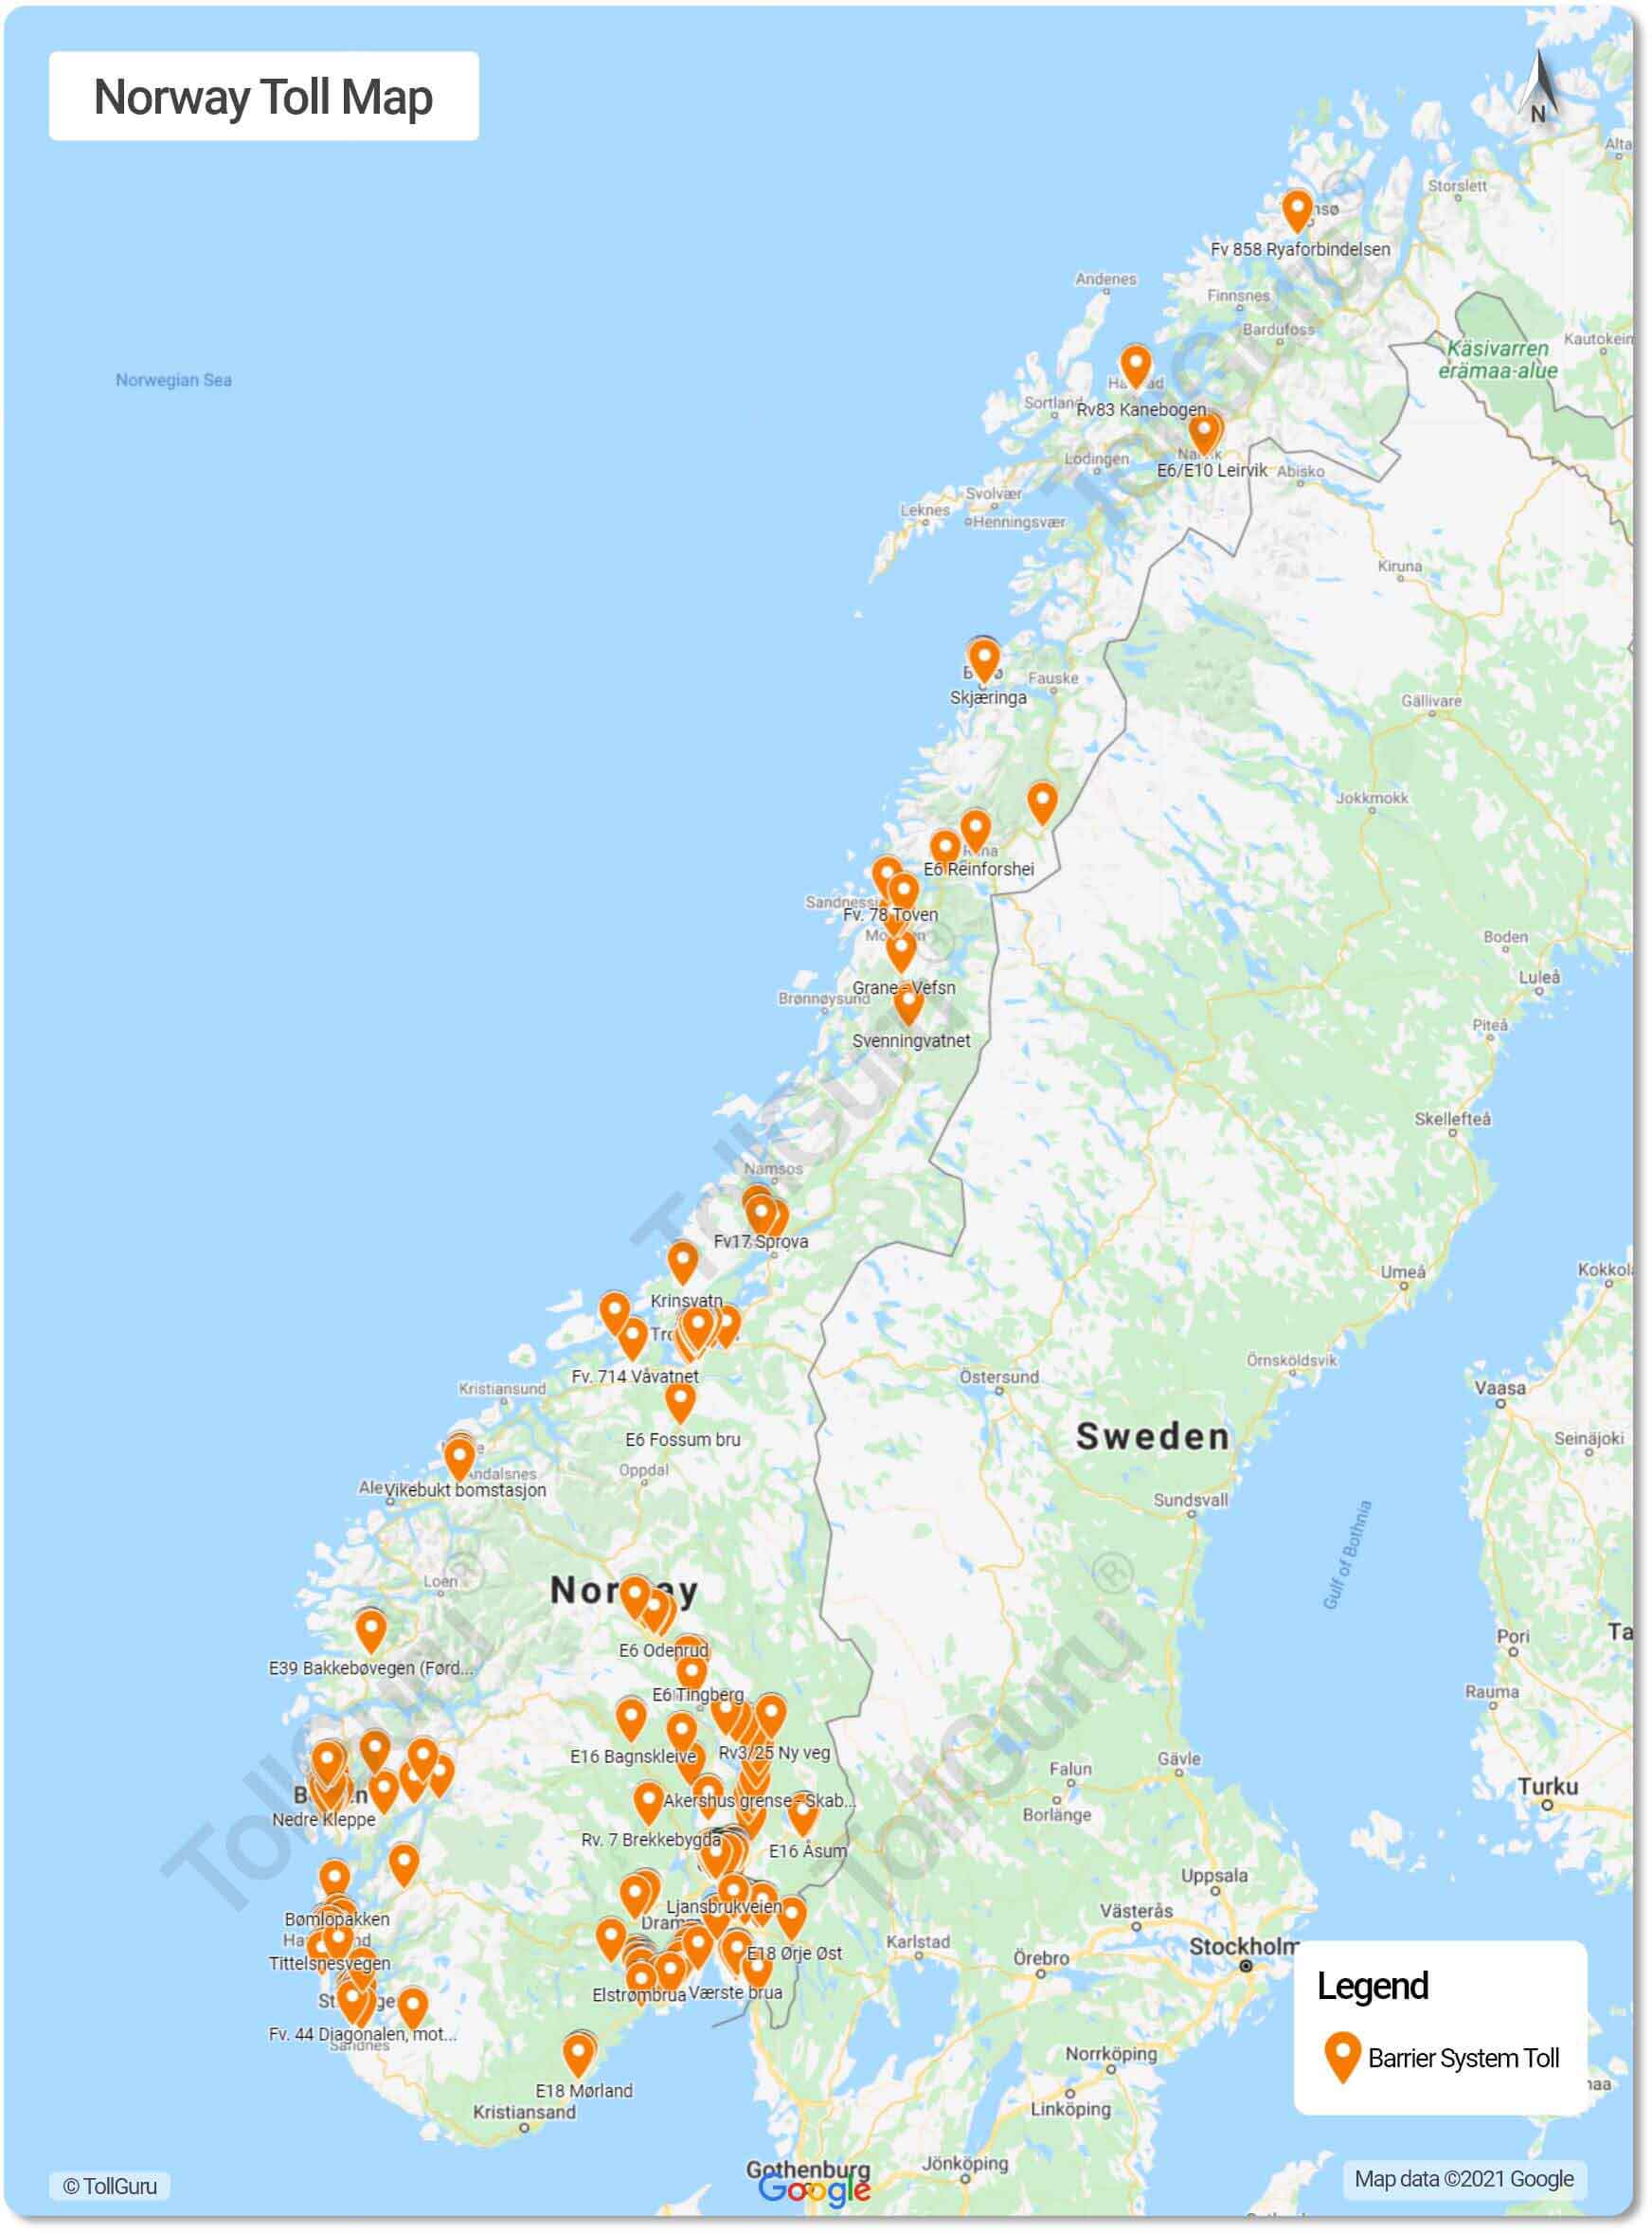 Shelling comfortable Decrease Road Tolls in Norway - M50 rates, Toll Roads Price List